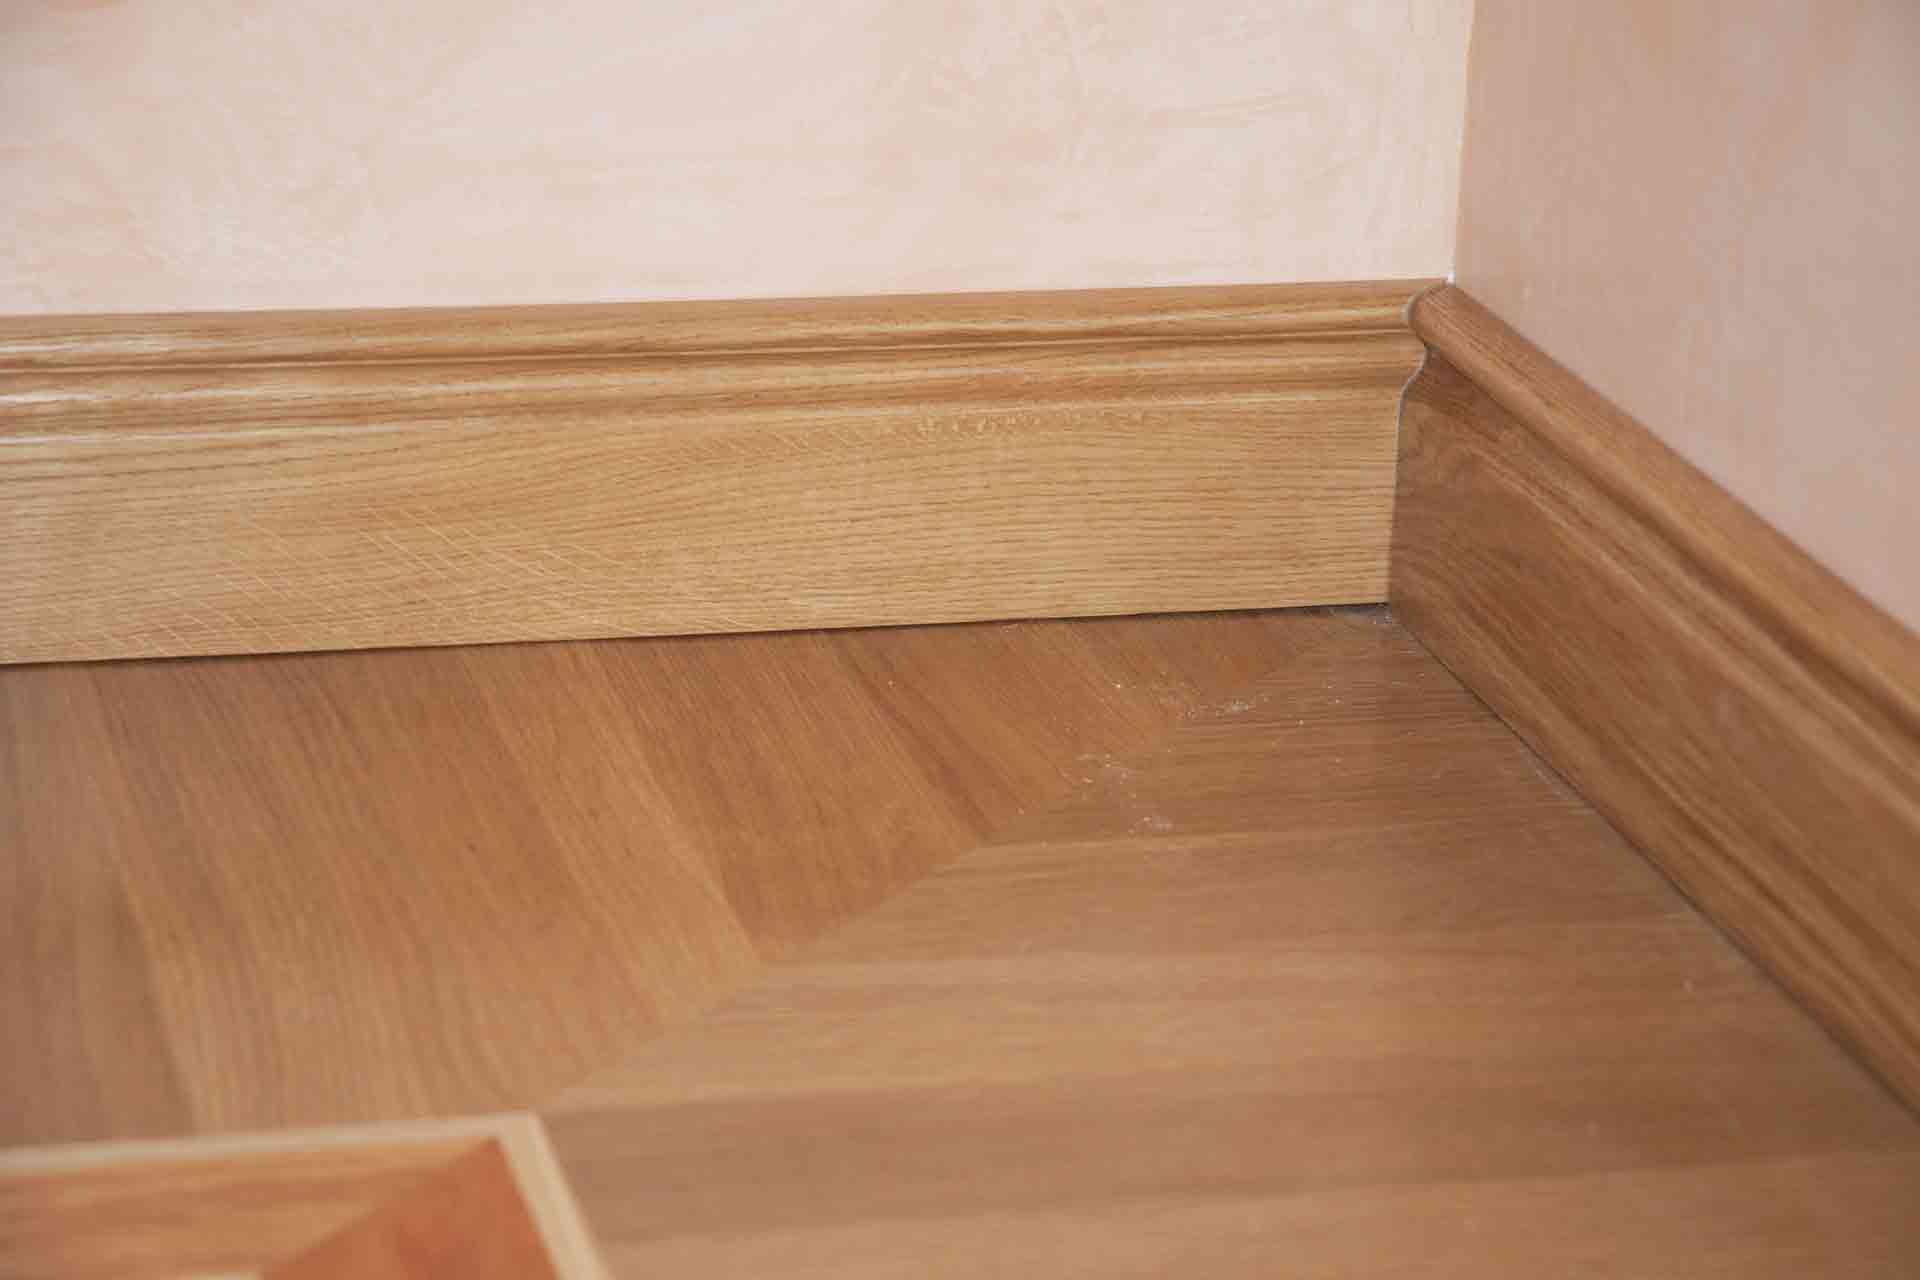 How to Fit Skirting Boards - Step-by-Step Guide | Checkatrade